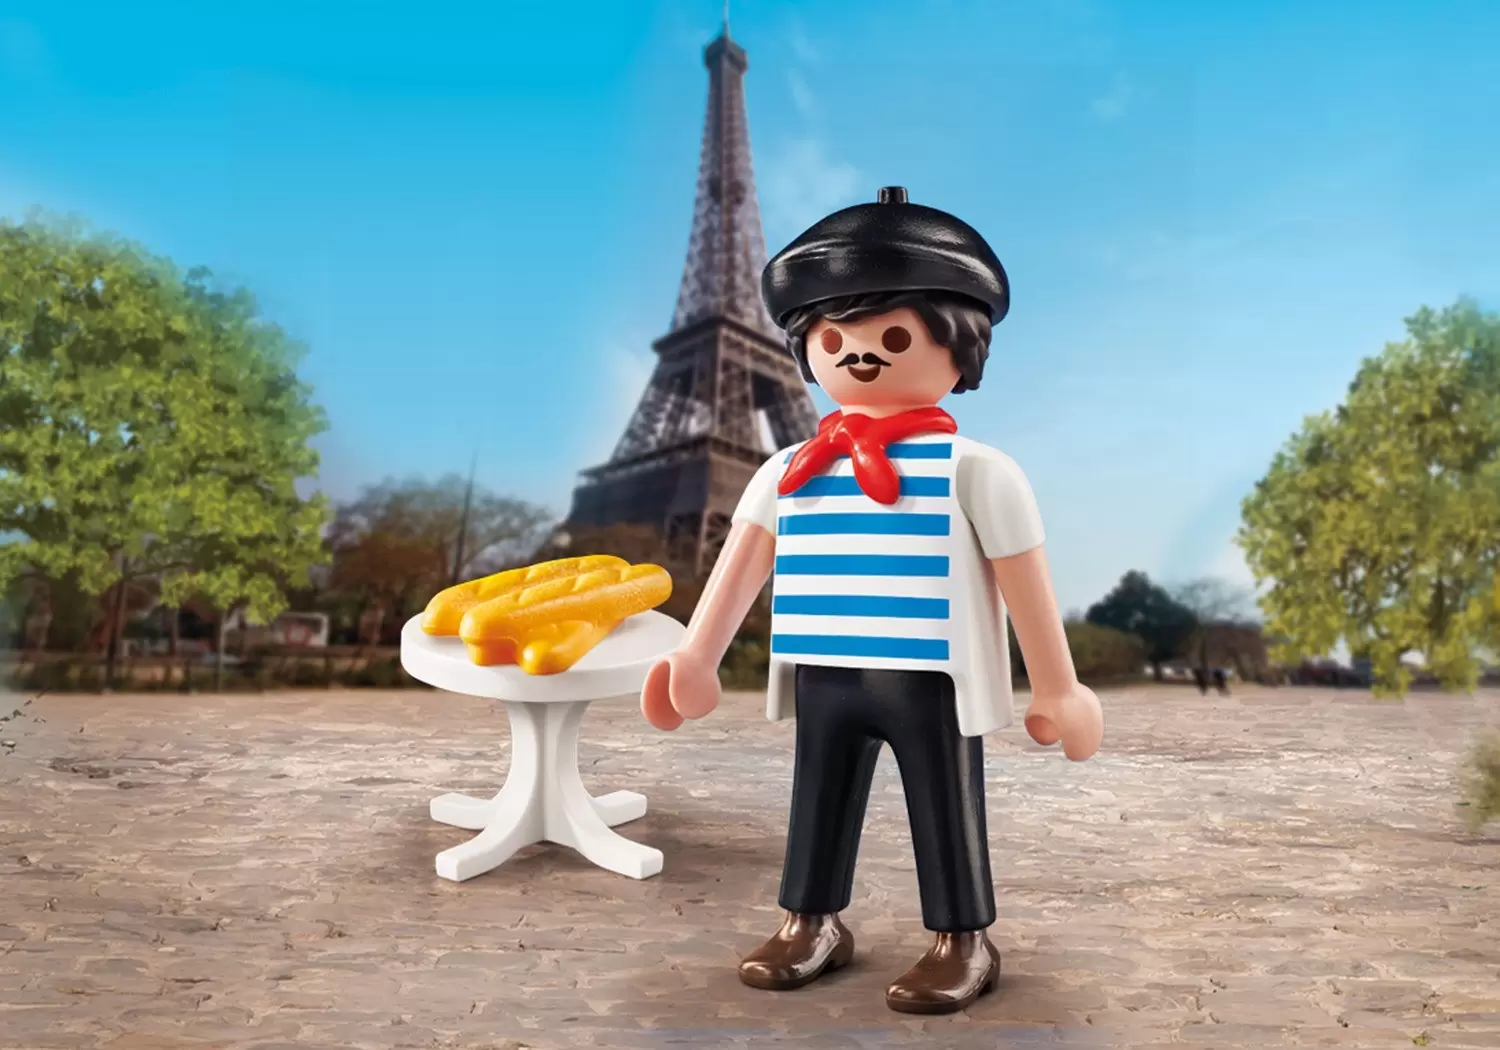 Playmobil on Hollidays - The french guy